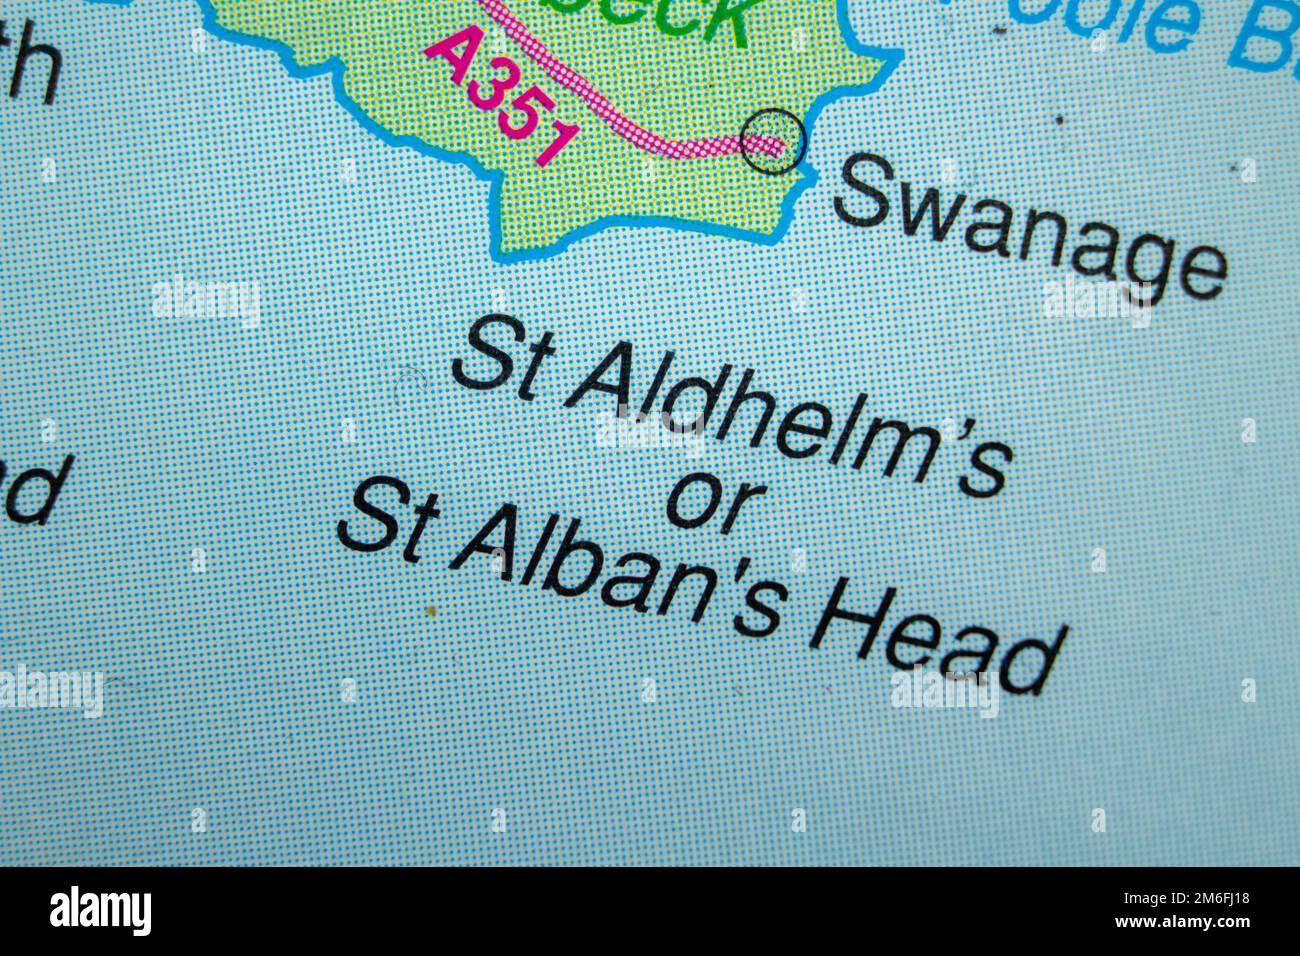 St Aldhelm's or St Alban's Head, United Kingdom atlas map town name Stock Photo